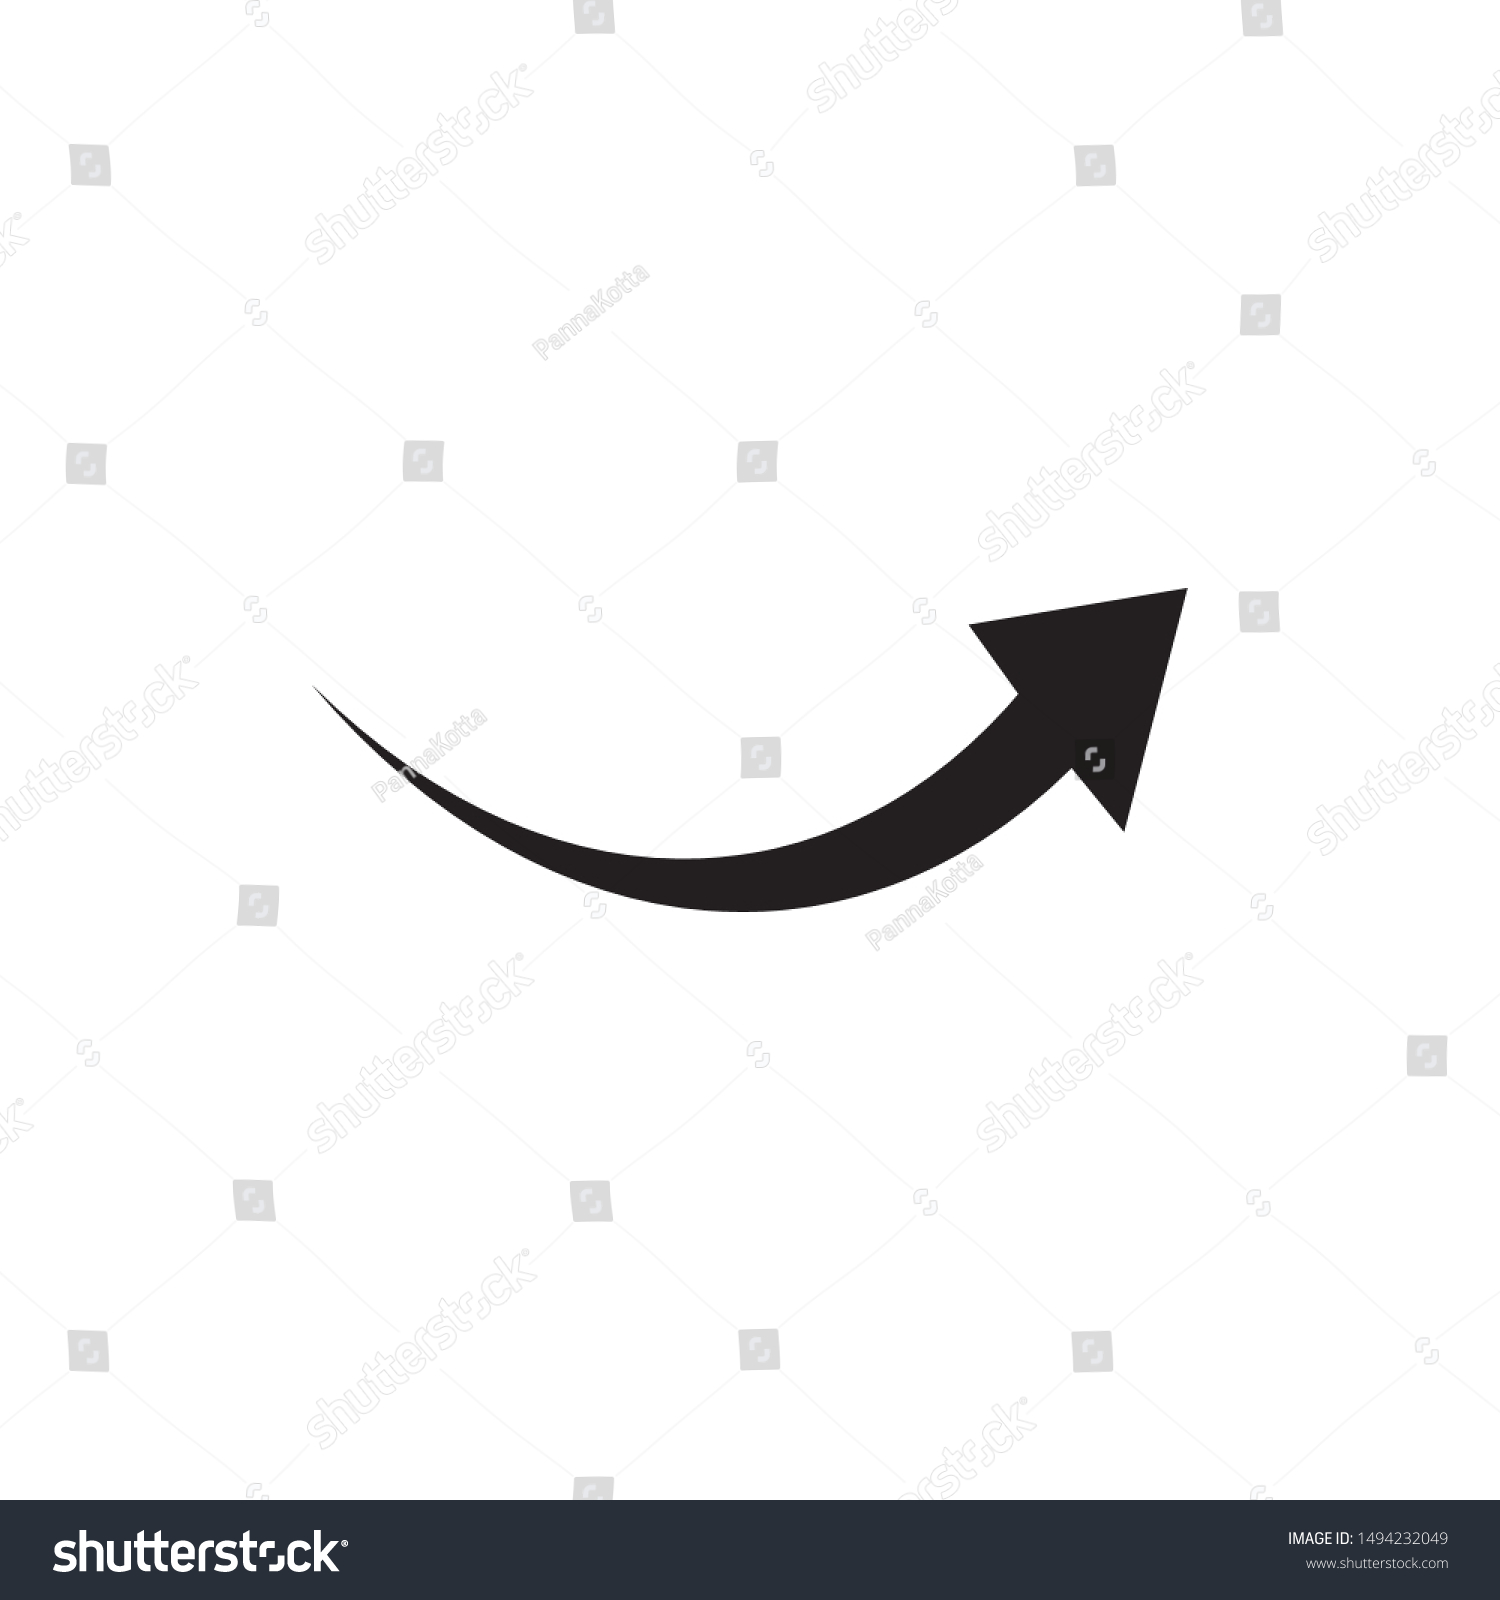 Arrow pointer vector icon isolated on white background #1494232049